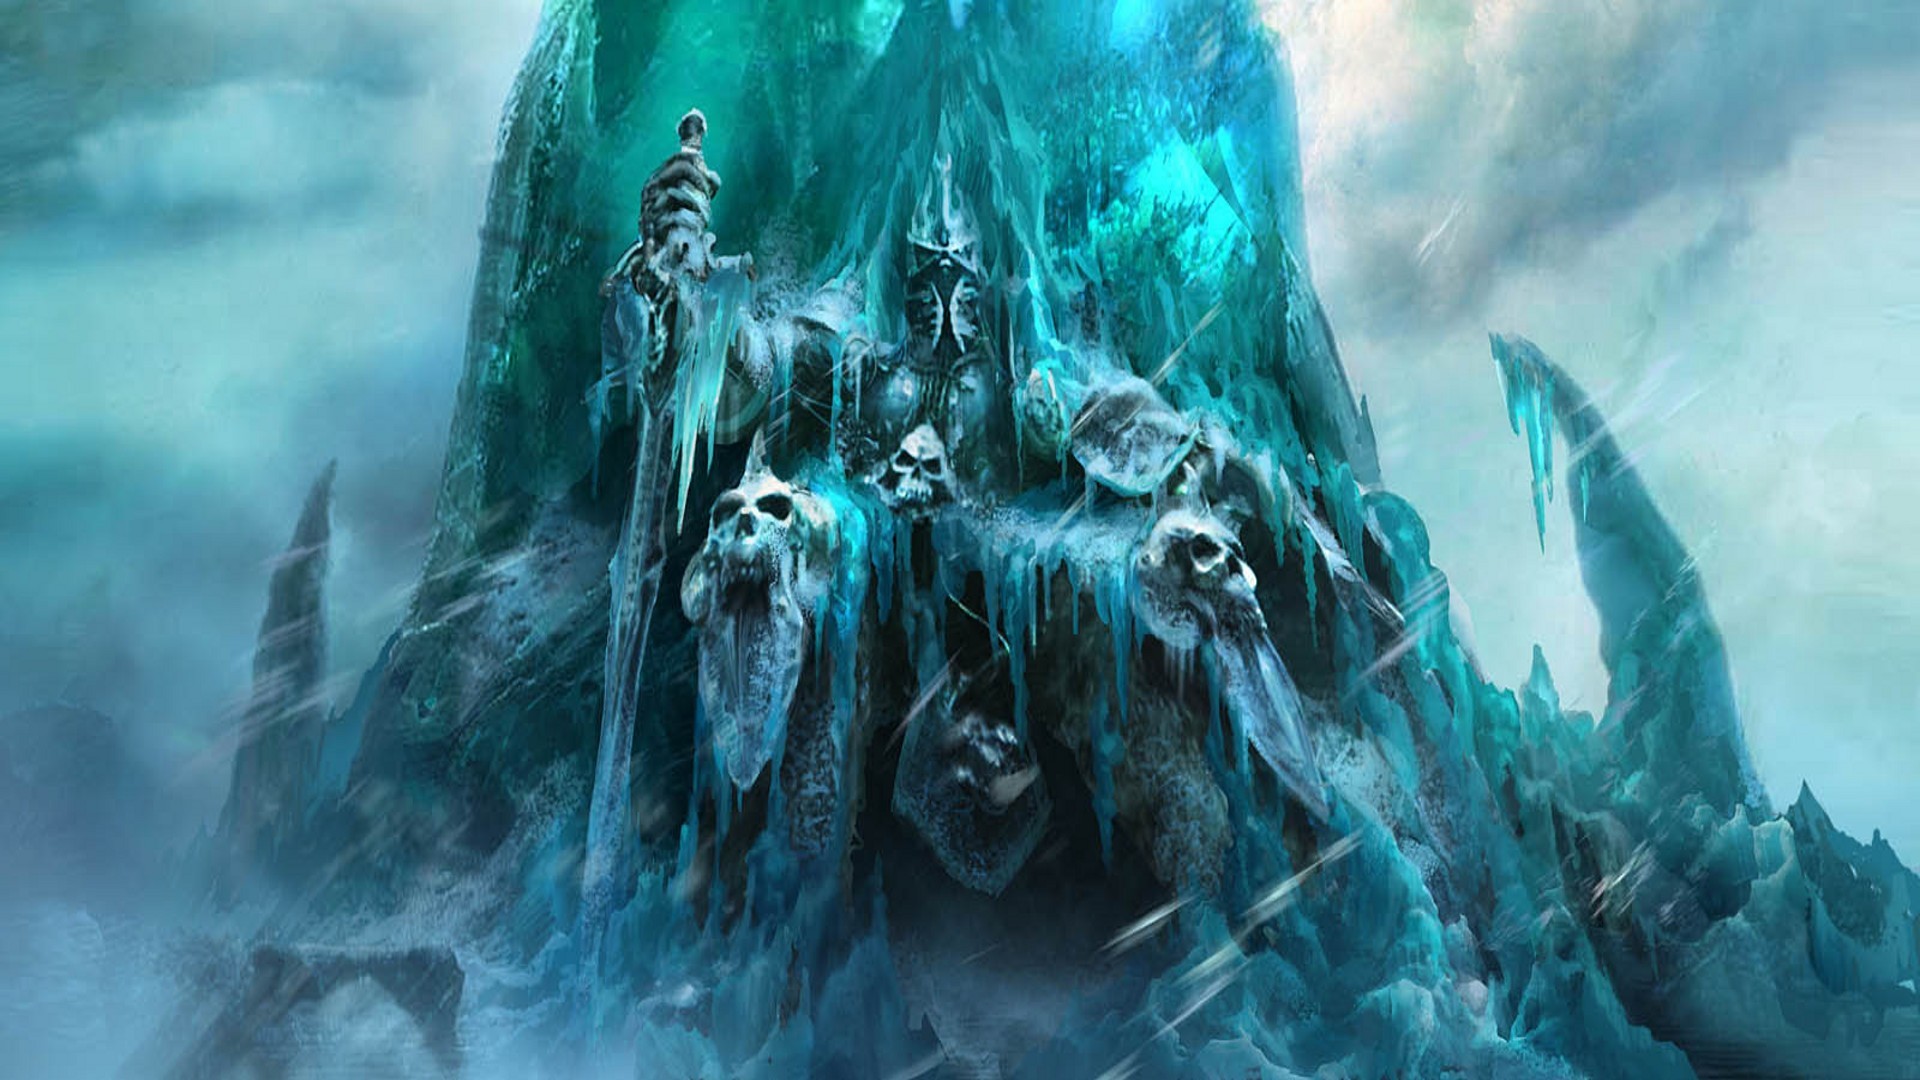 lich king animated wallpaper,cg artwork,action adventure game,adventure game,mythology,fictional character